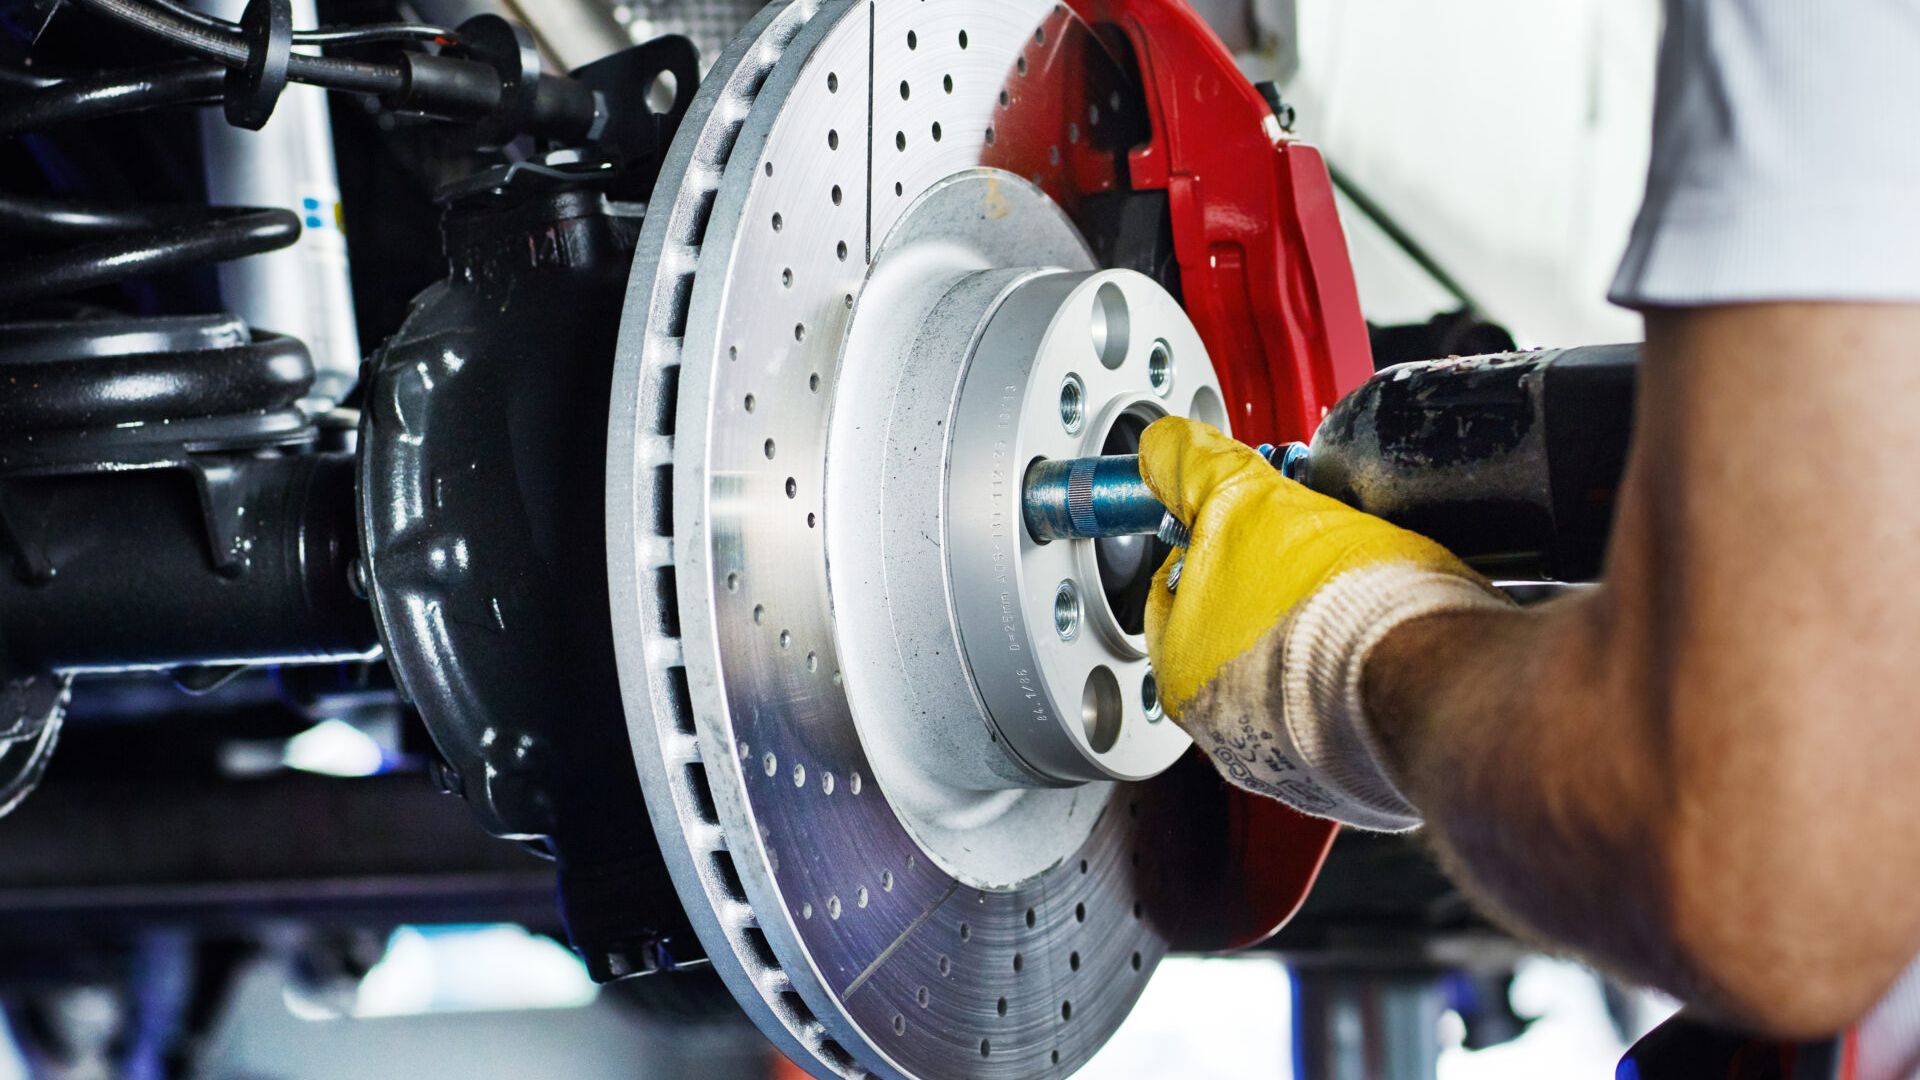 What Are the Warning Signs That Indicate Brake Maintenance is Needed